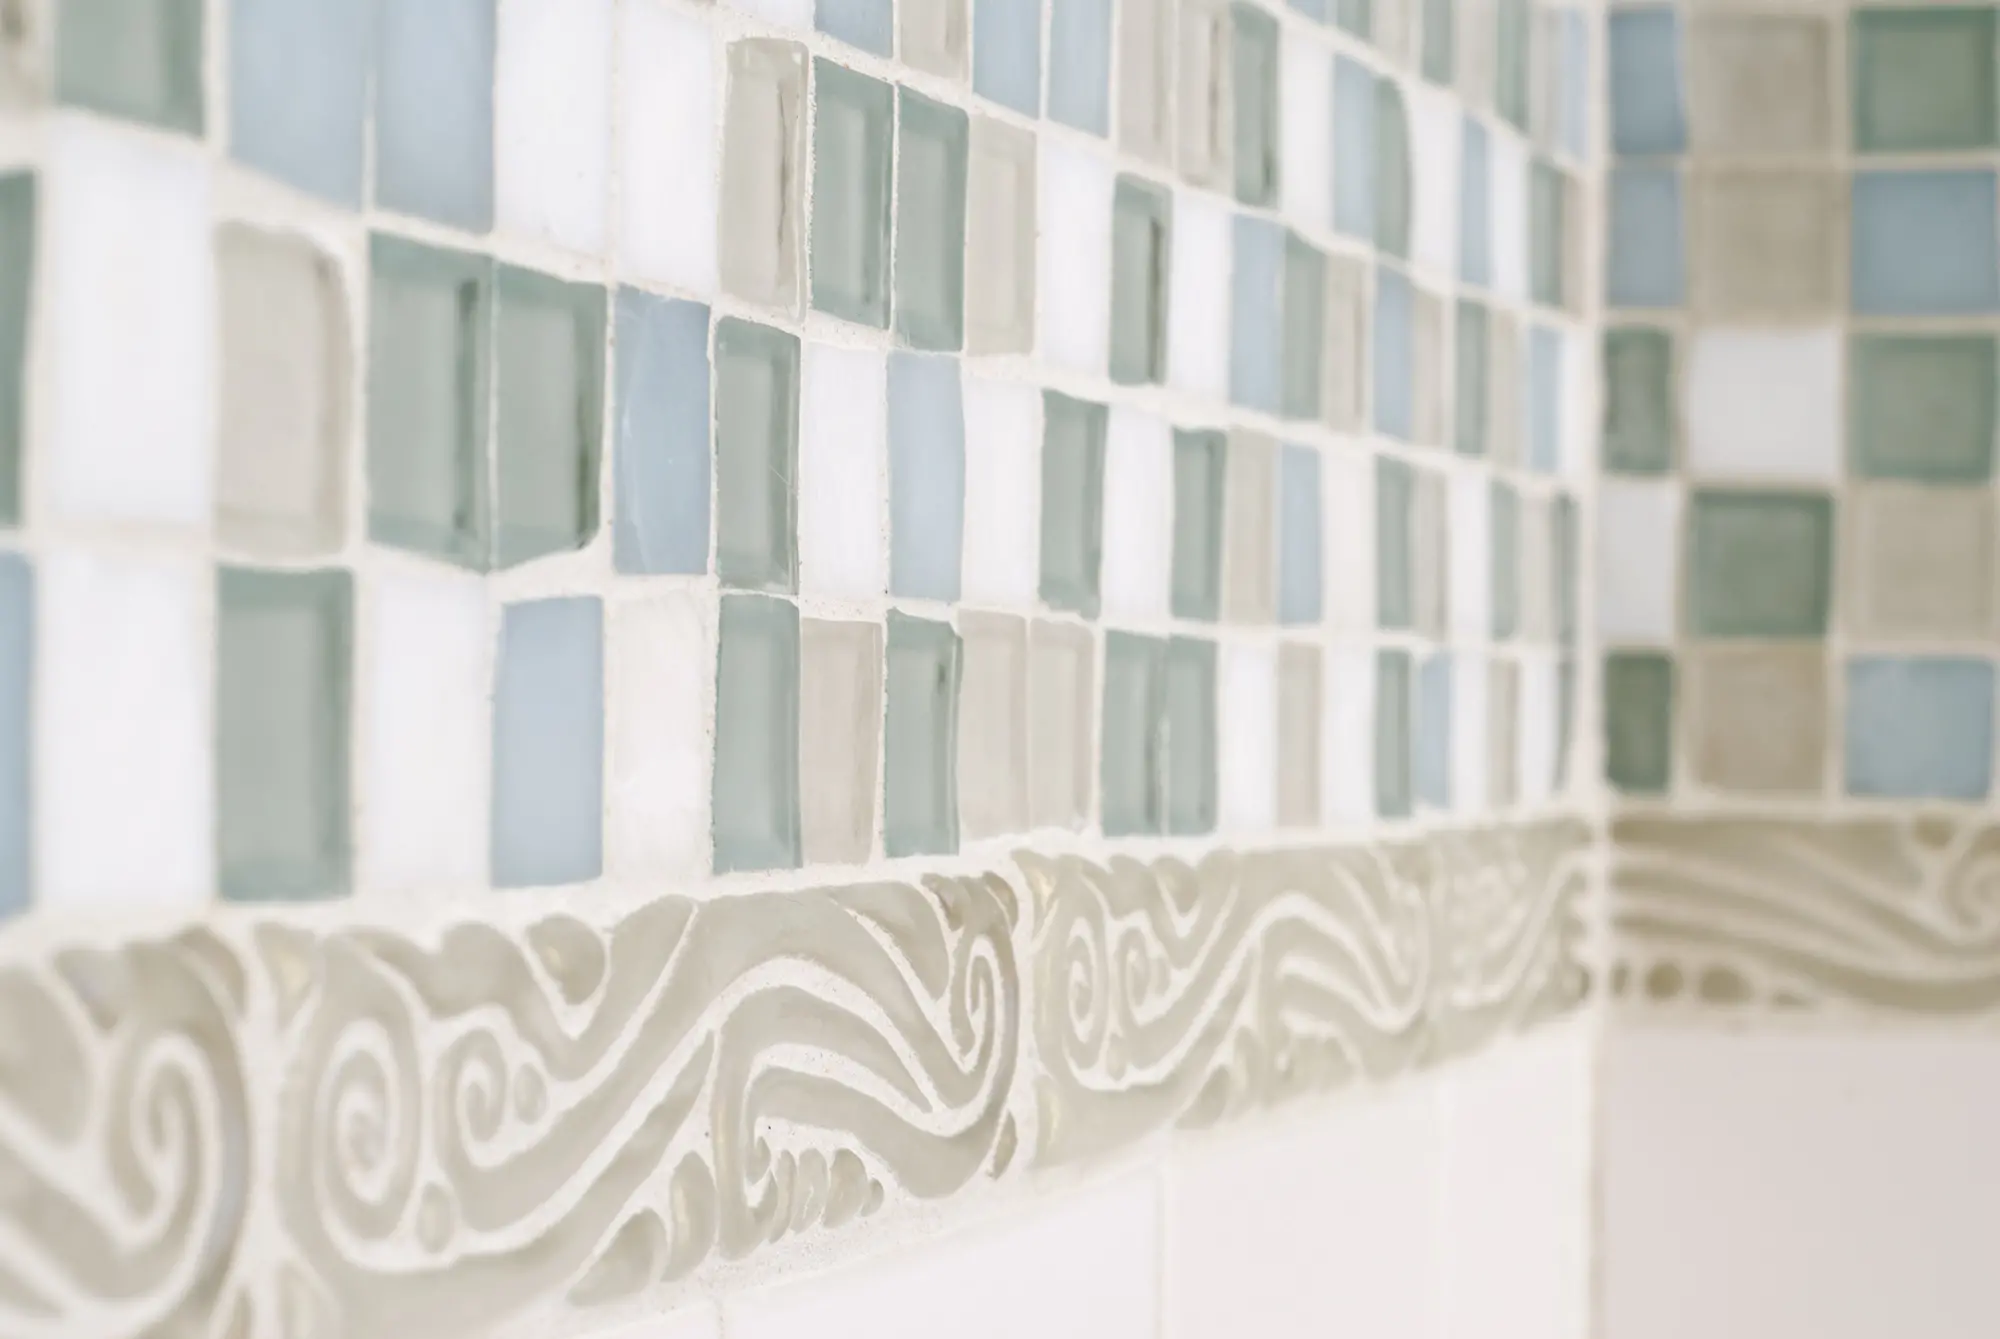 Shower tiling detail at Bayberry